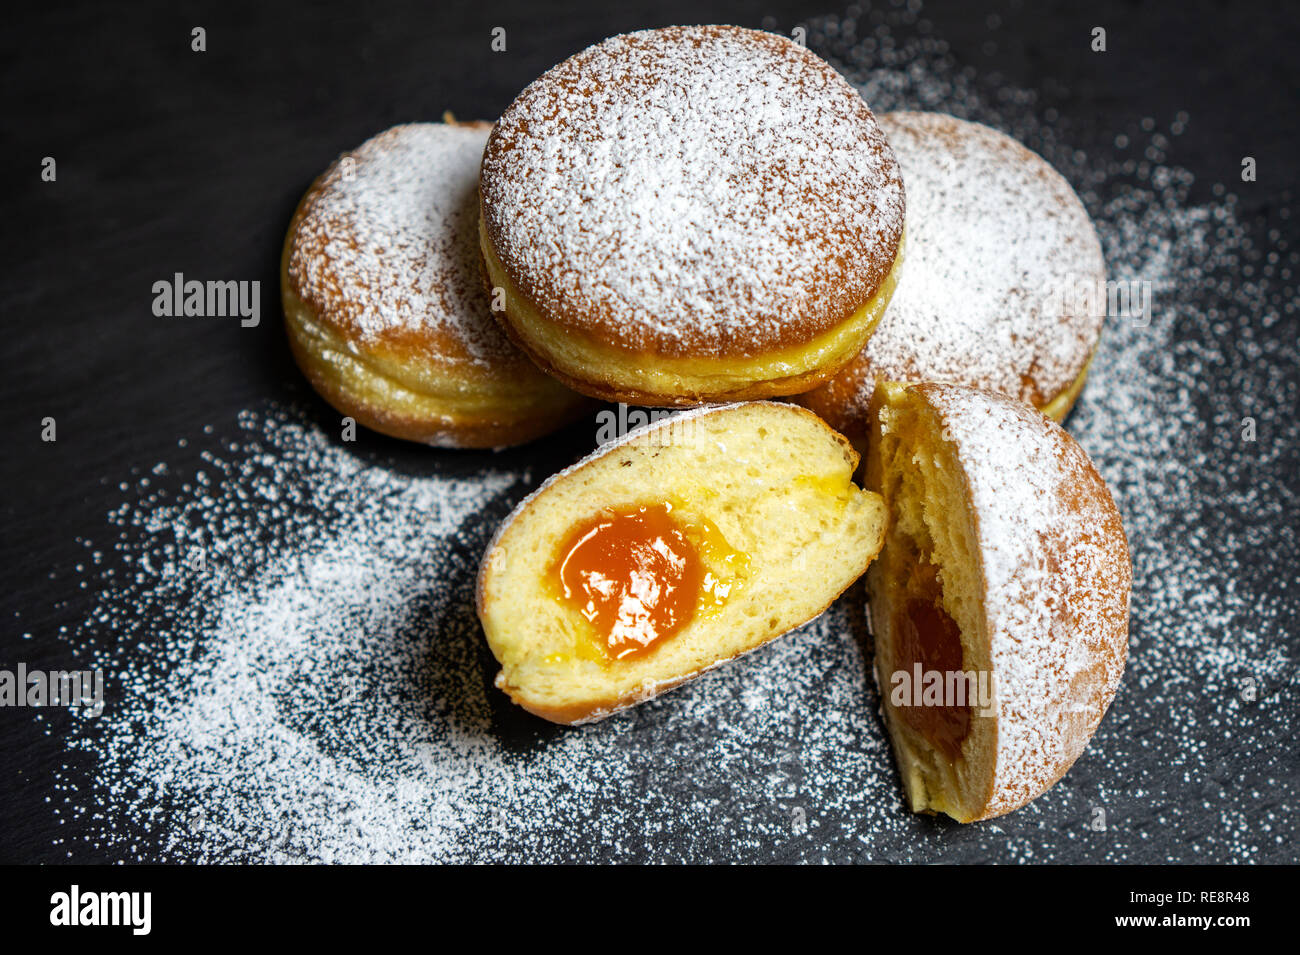 Berliner Doughnuts European donuts tradicional bakery for fasching carneval time with peach jam in Europe Stock Photo